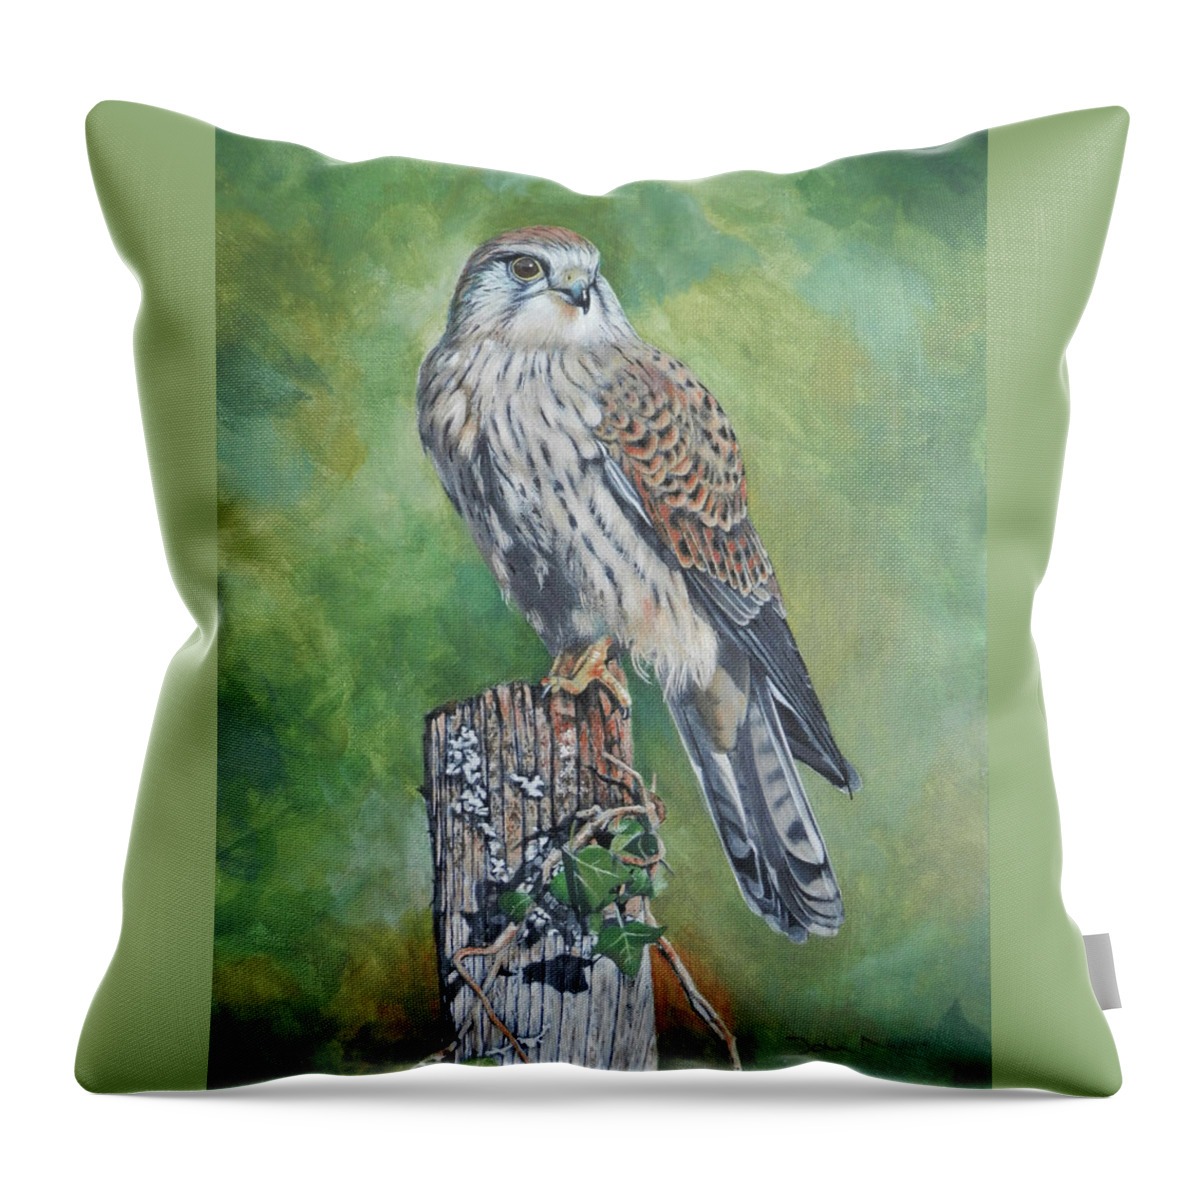 Kestrel Throw Pillow featuring the painting A Perched Kestrel by John Neeve